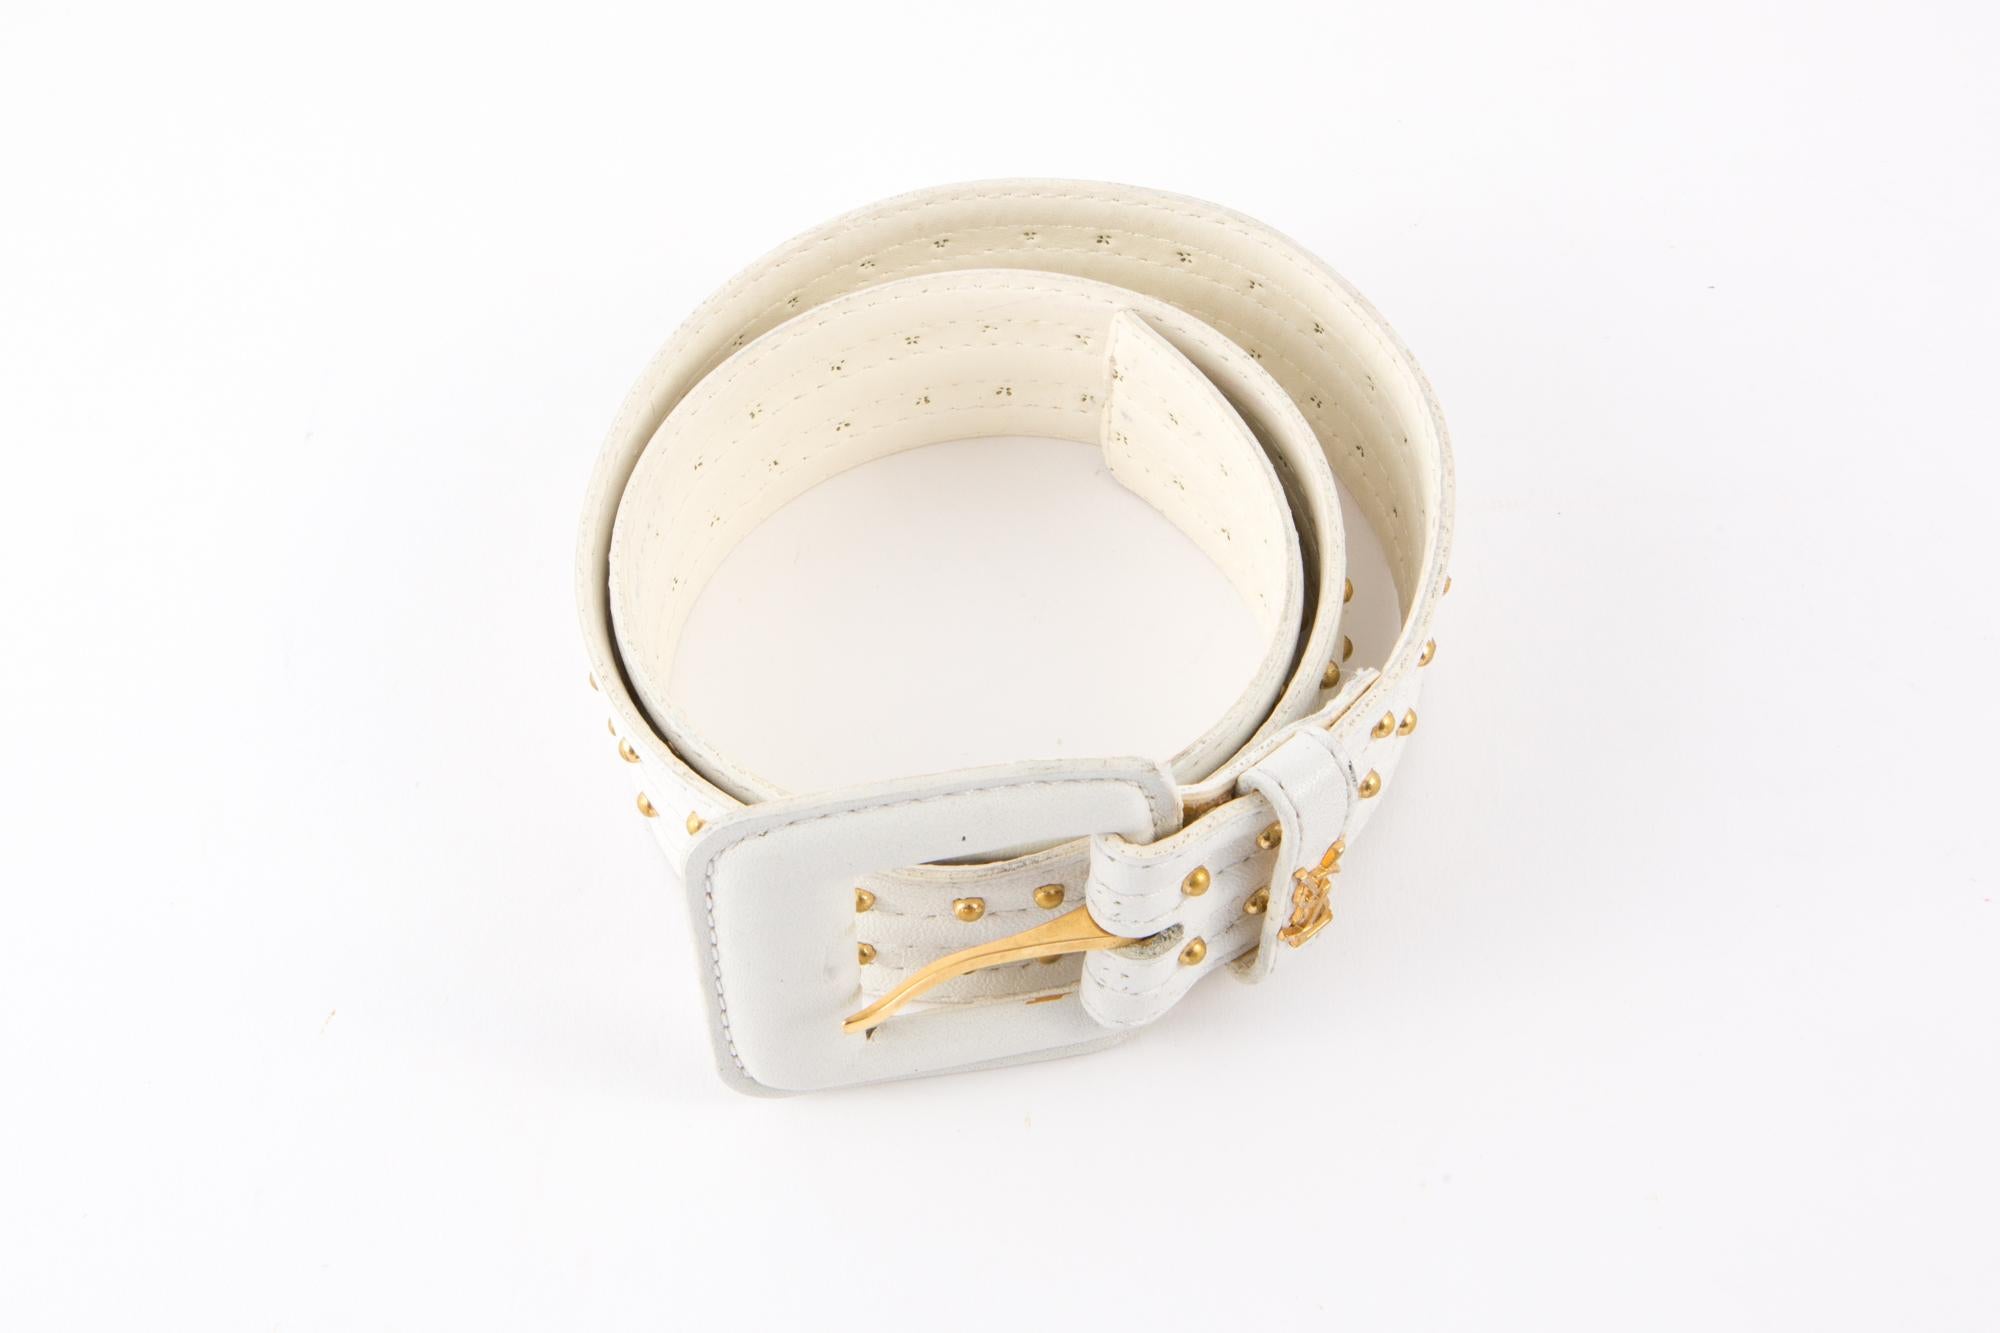 Yves Saint Laurent white leather belt featuring  gold tone studs, an inside white leather lining. 
In good vintage condition( some marks on the inside belt) Made in France.
Estimated size  75 cm
We guarantee you will receive this gorgeous item as